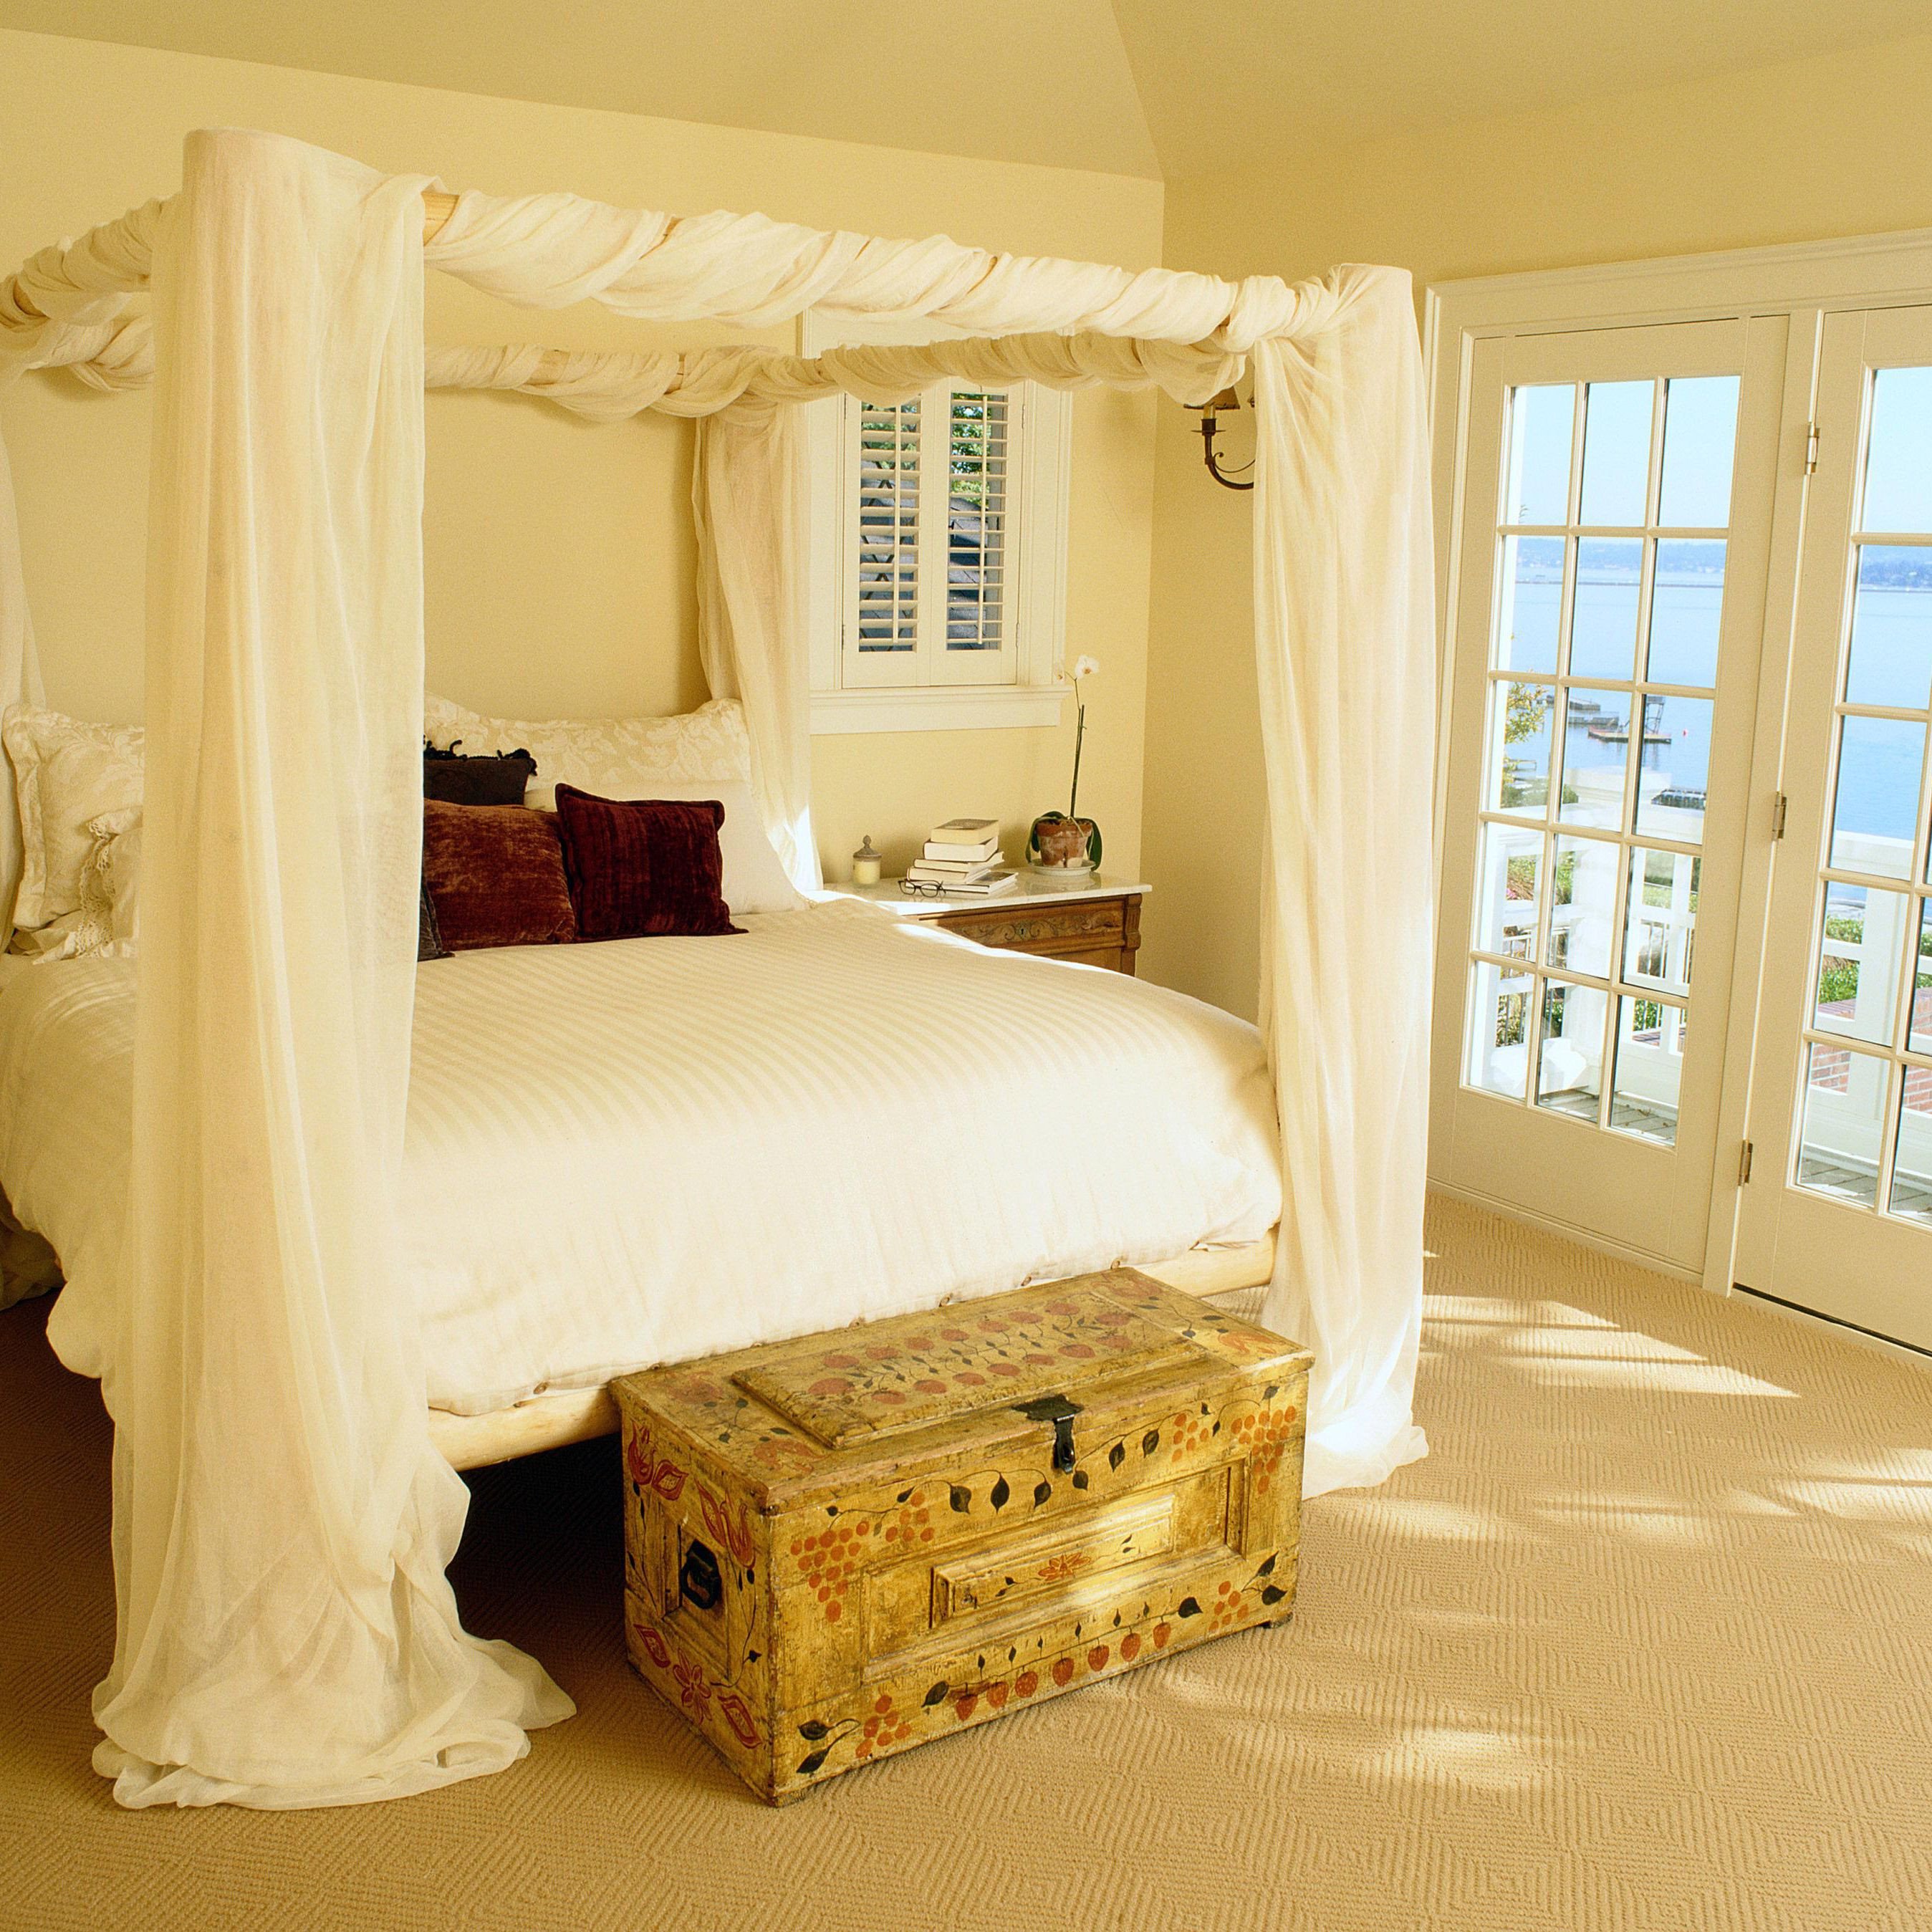 Girl Canopy Bedroom Set Luxury Diy Your Own Beautiful and Romantic Canopy Bed